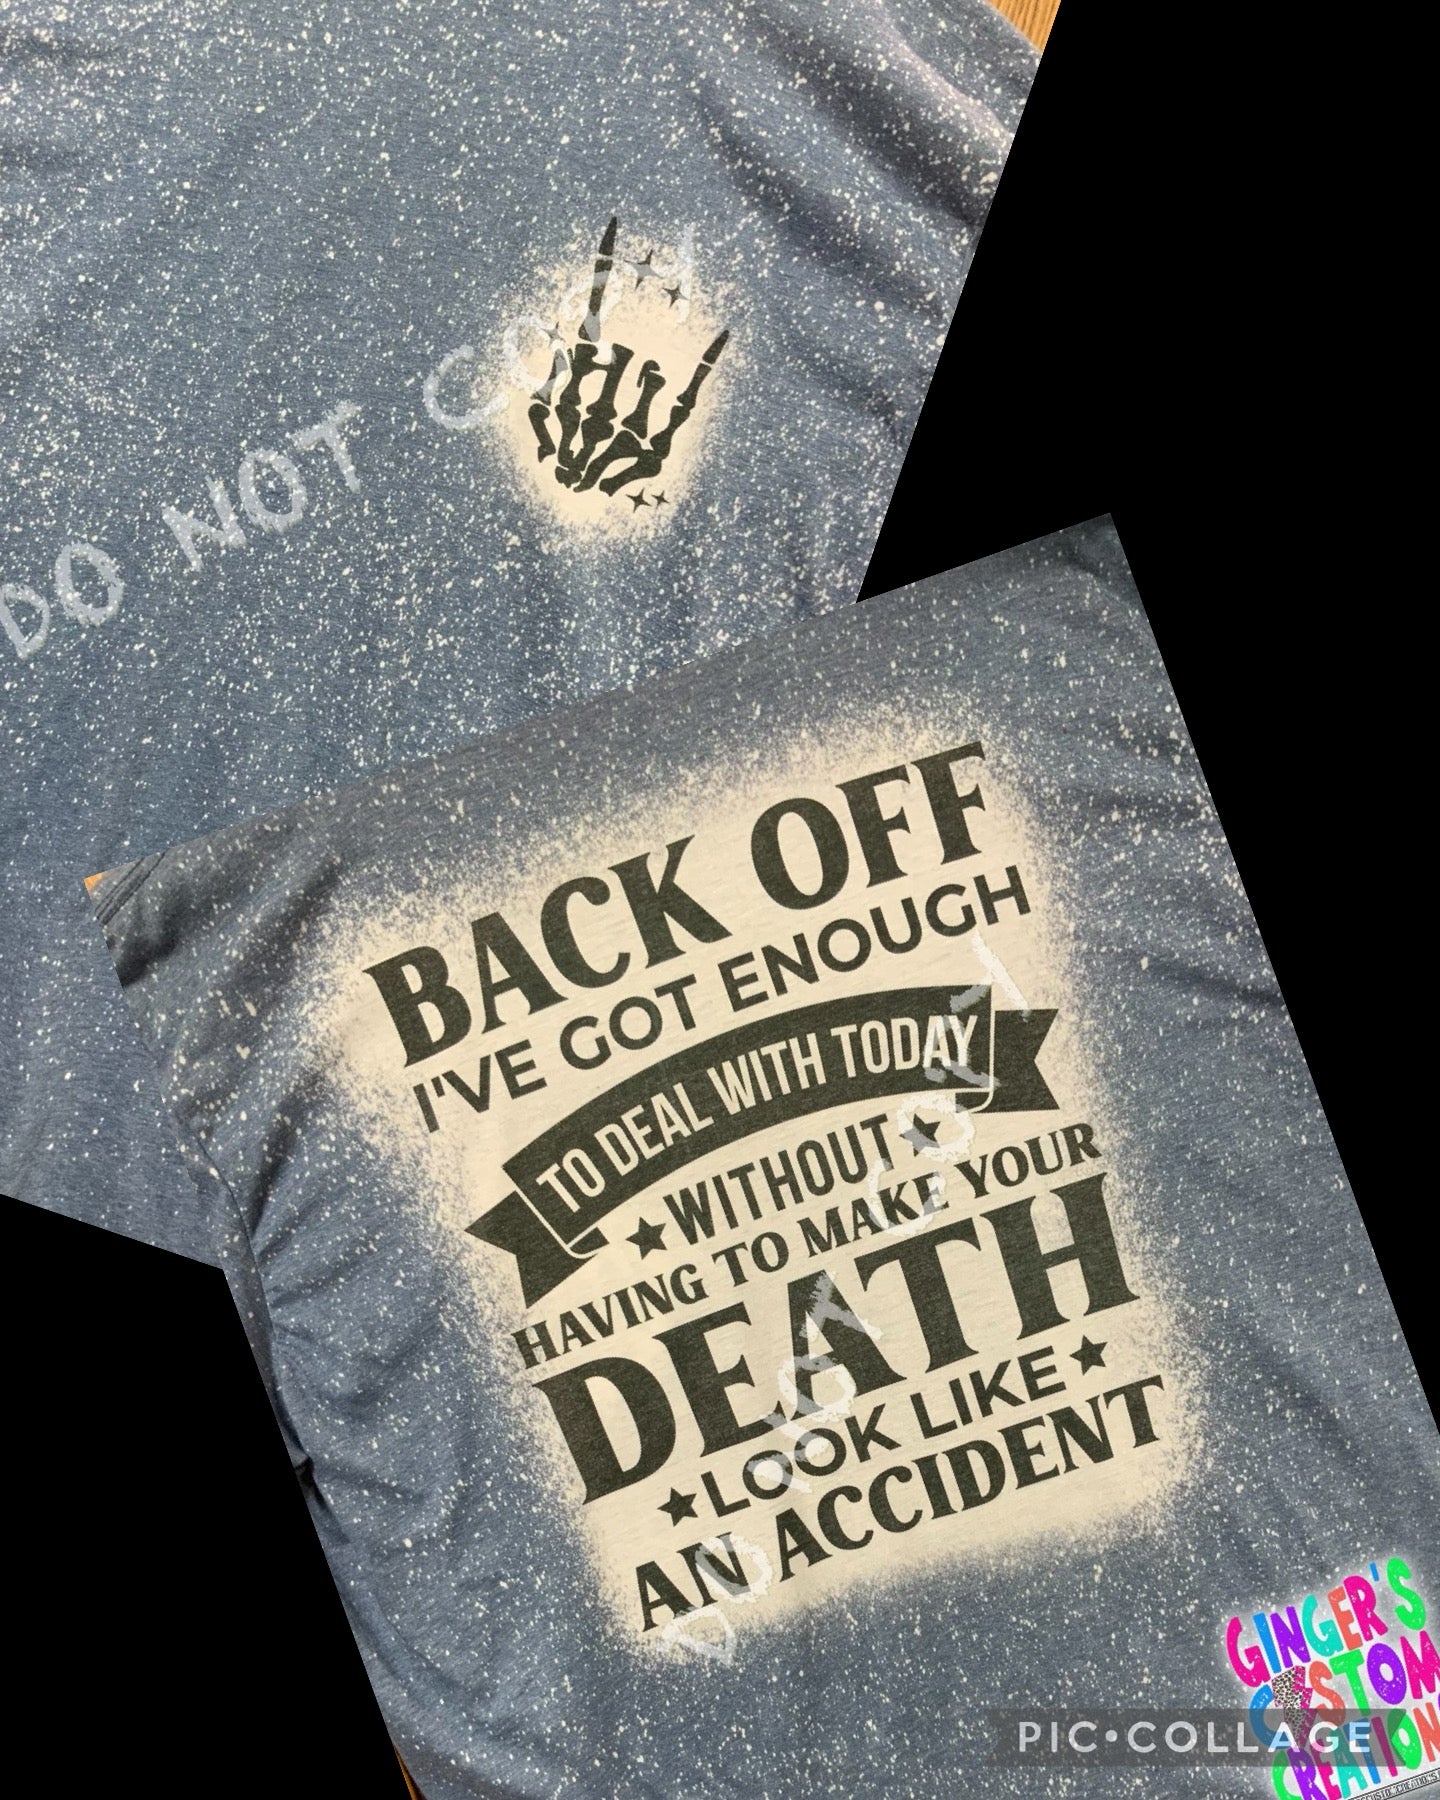 BACK OFF I GOT ENOUGH TO DEAL WITH - front&back   - BLEACHED TSHIRT